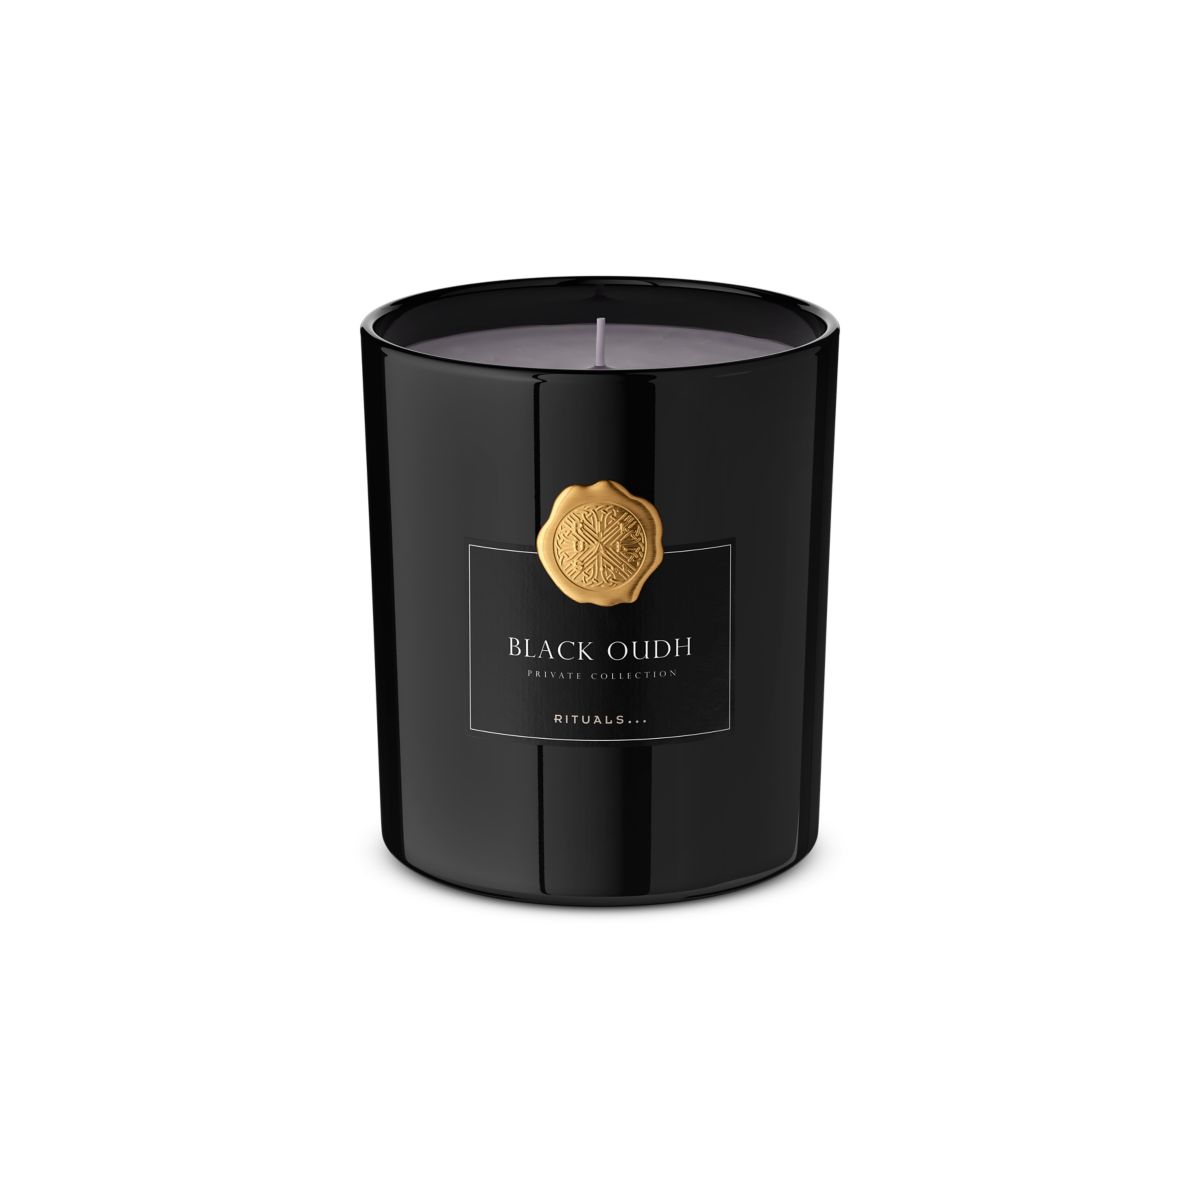 Rituals Luxury Scented Candle - Black Oudh